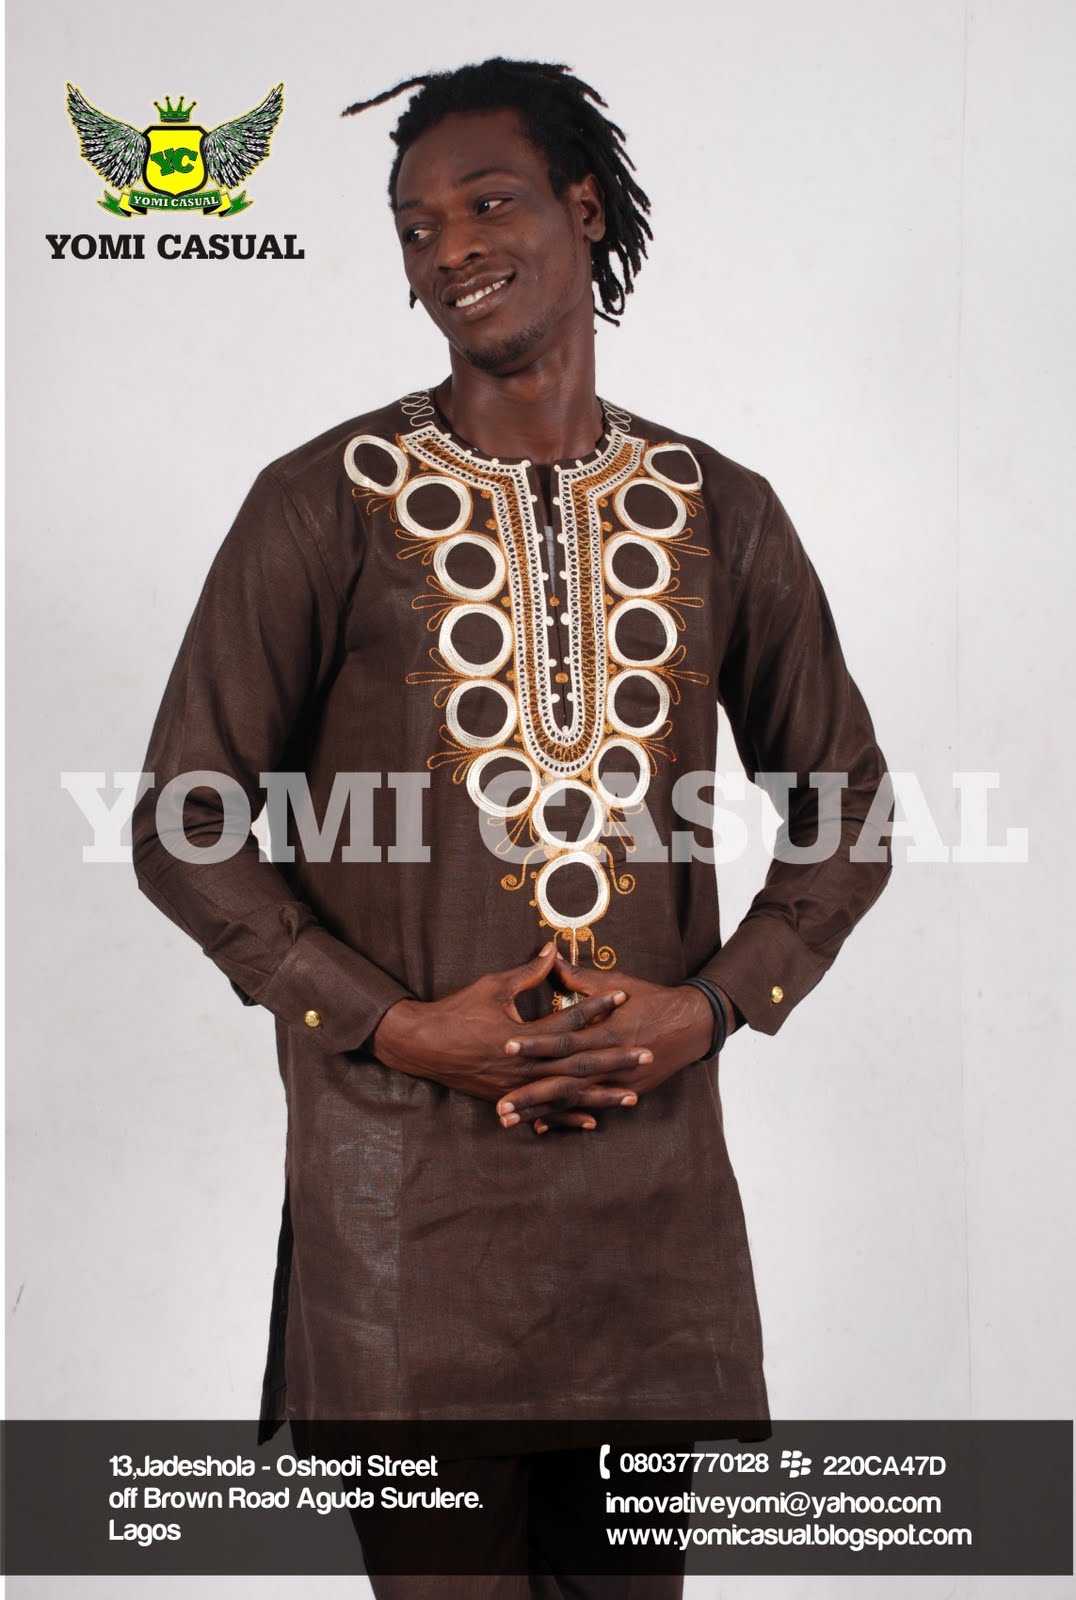 YOMI CASUAL CLOTHING: its YC AGAIN!!!